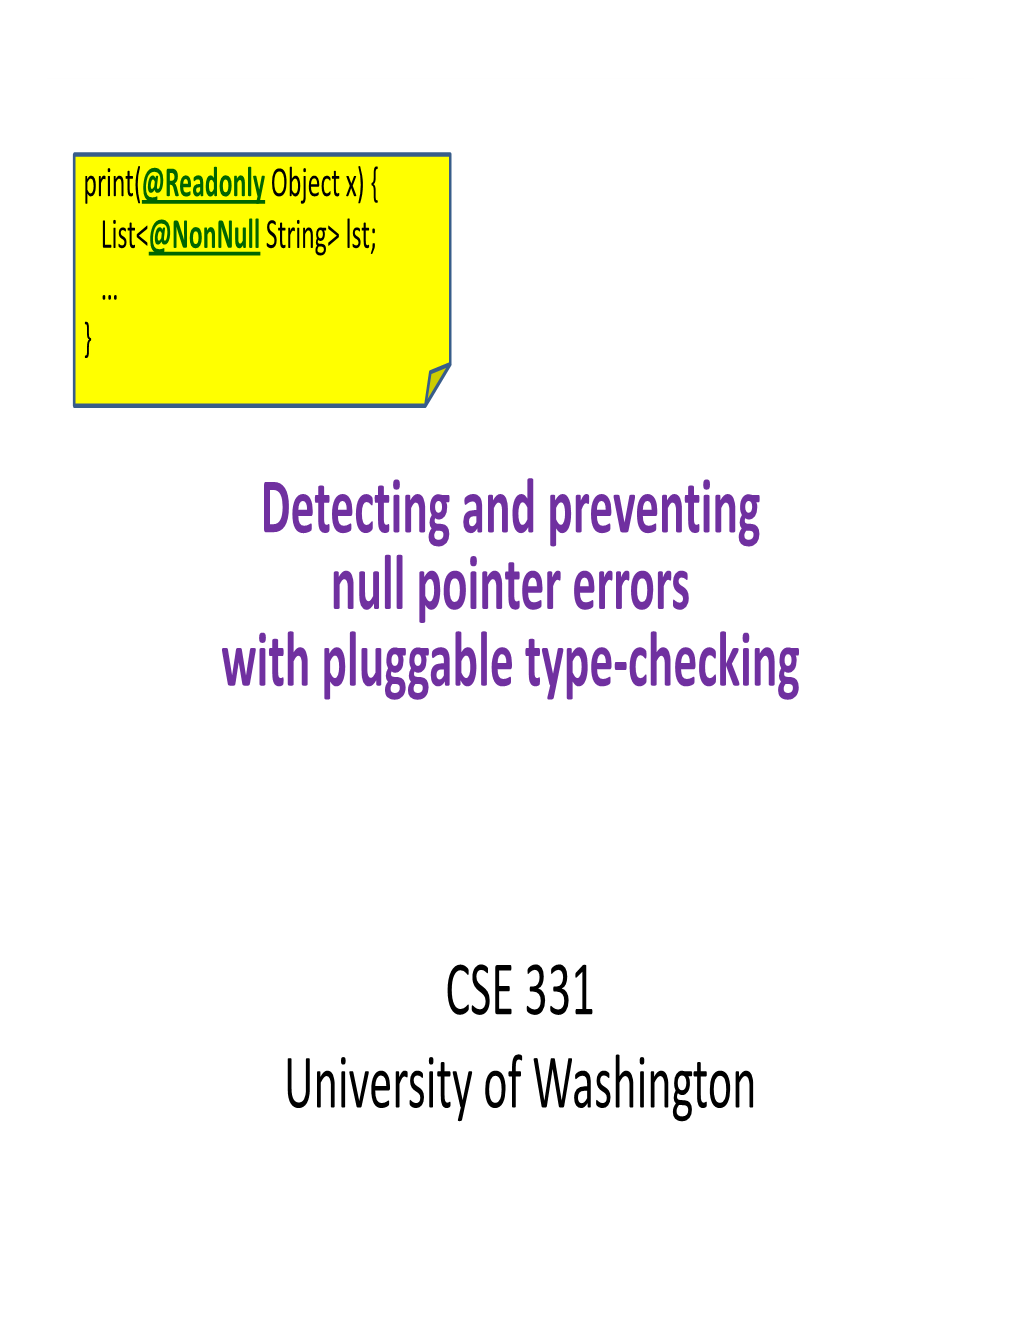 Detecting and Preventing Null Pointer Errors with Pluggable Type-Checking